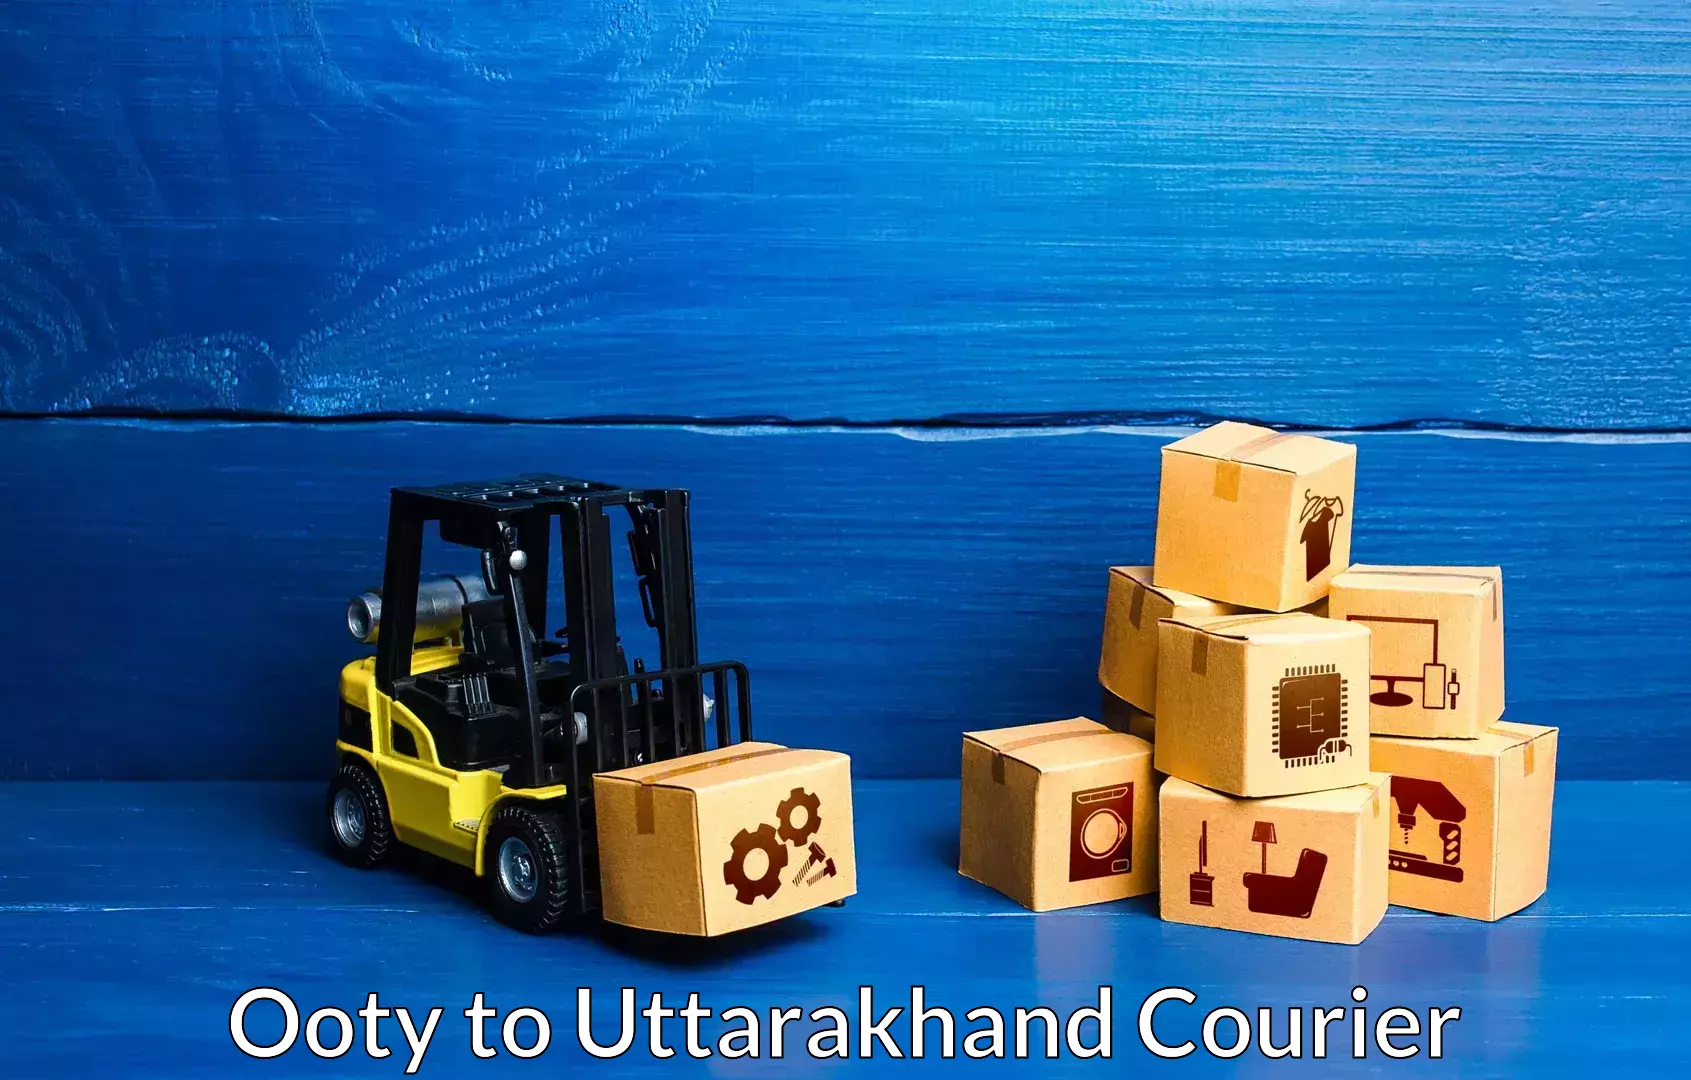 Household goods transport service Ooty to Pithoragarh